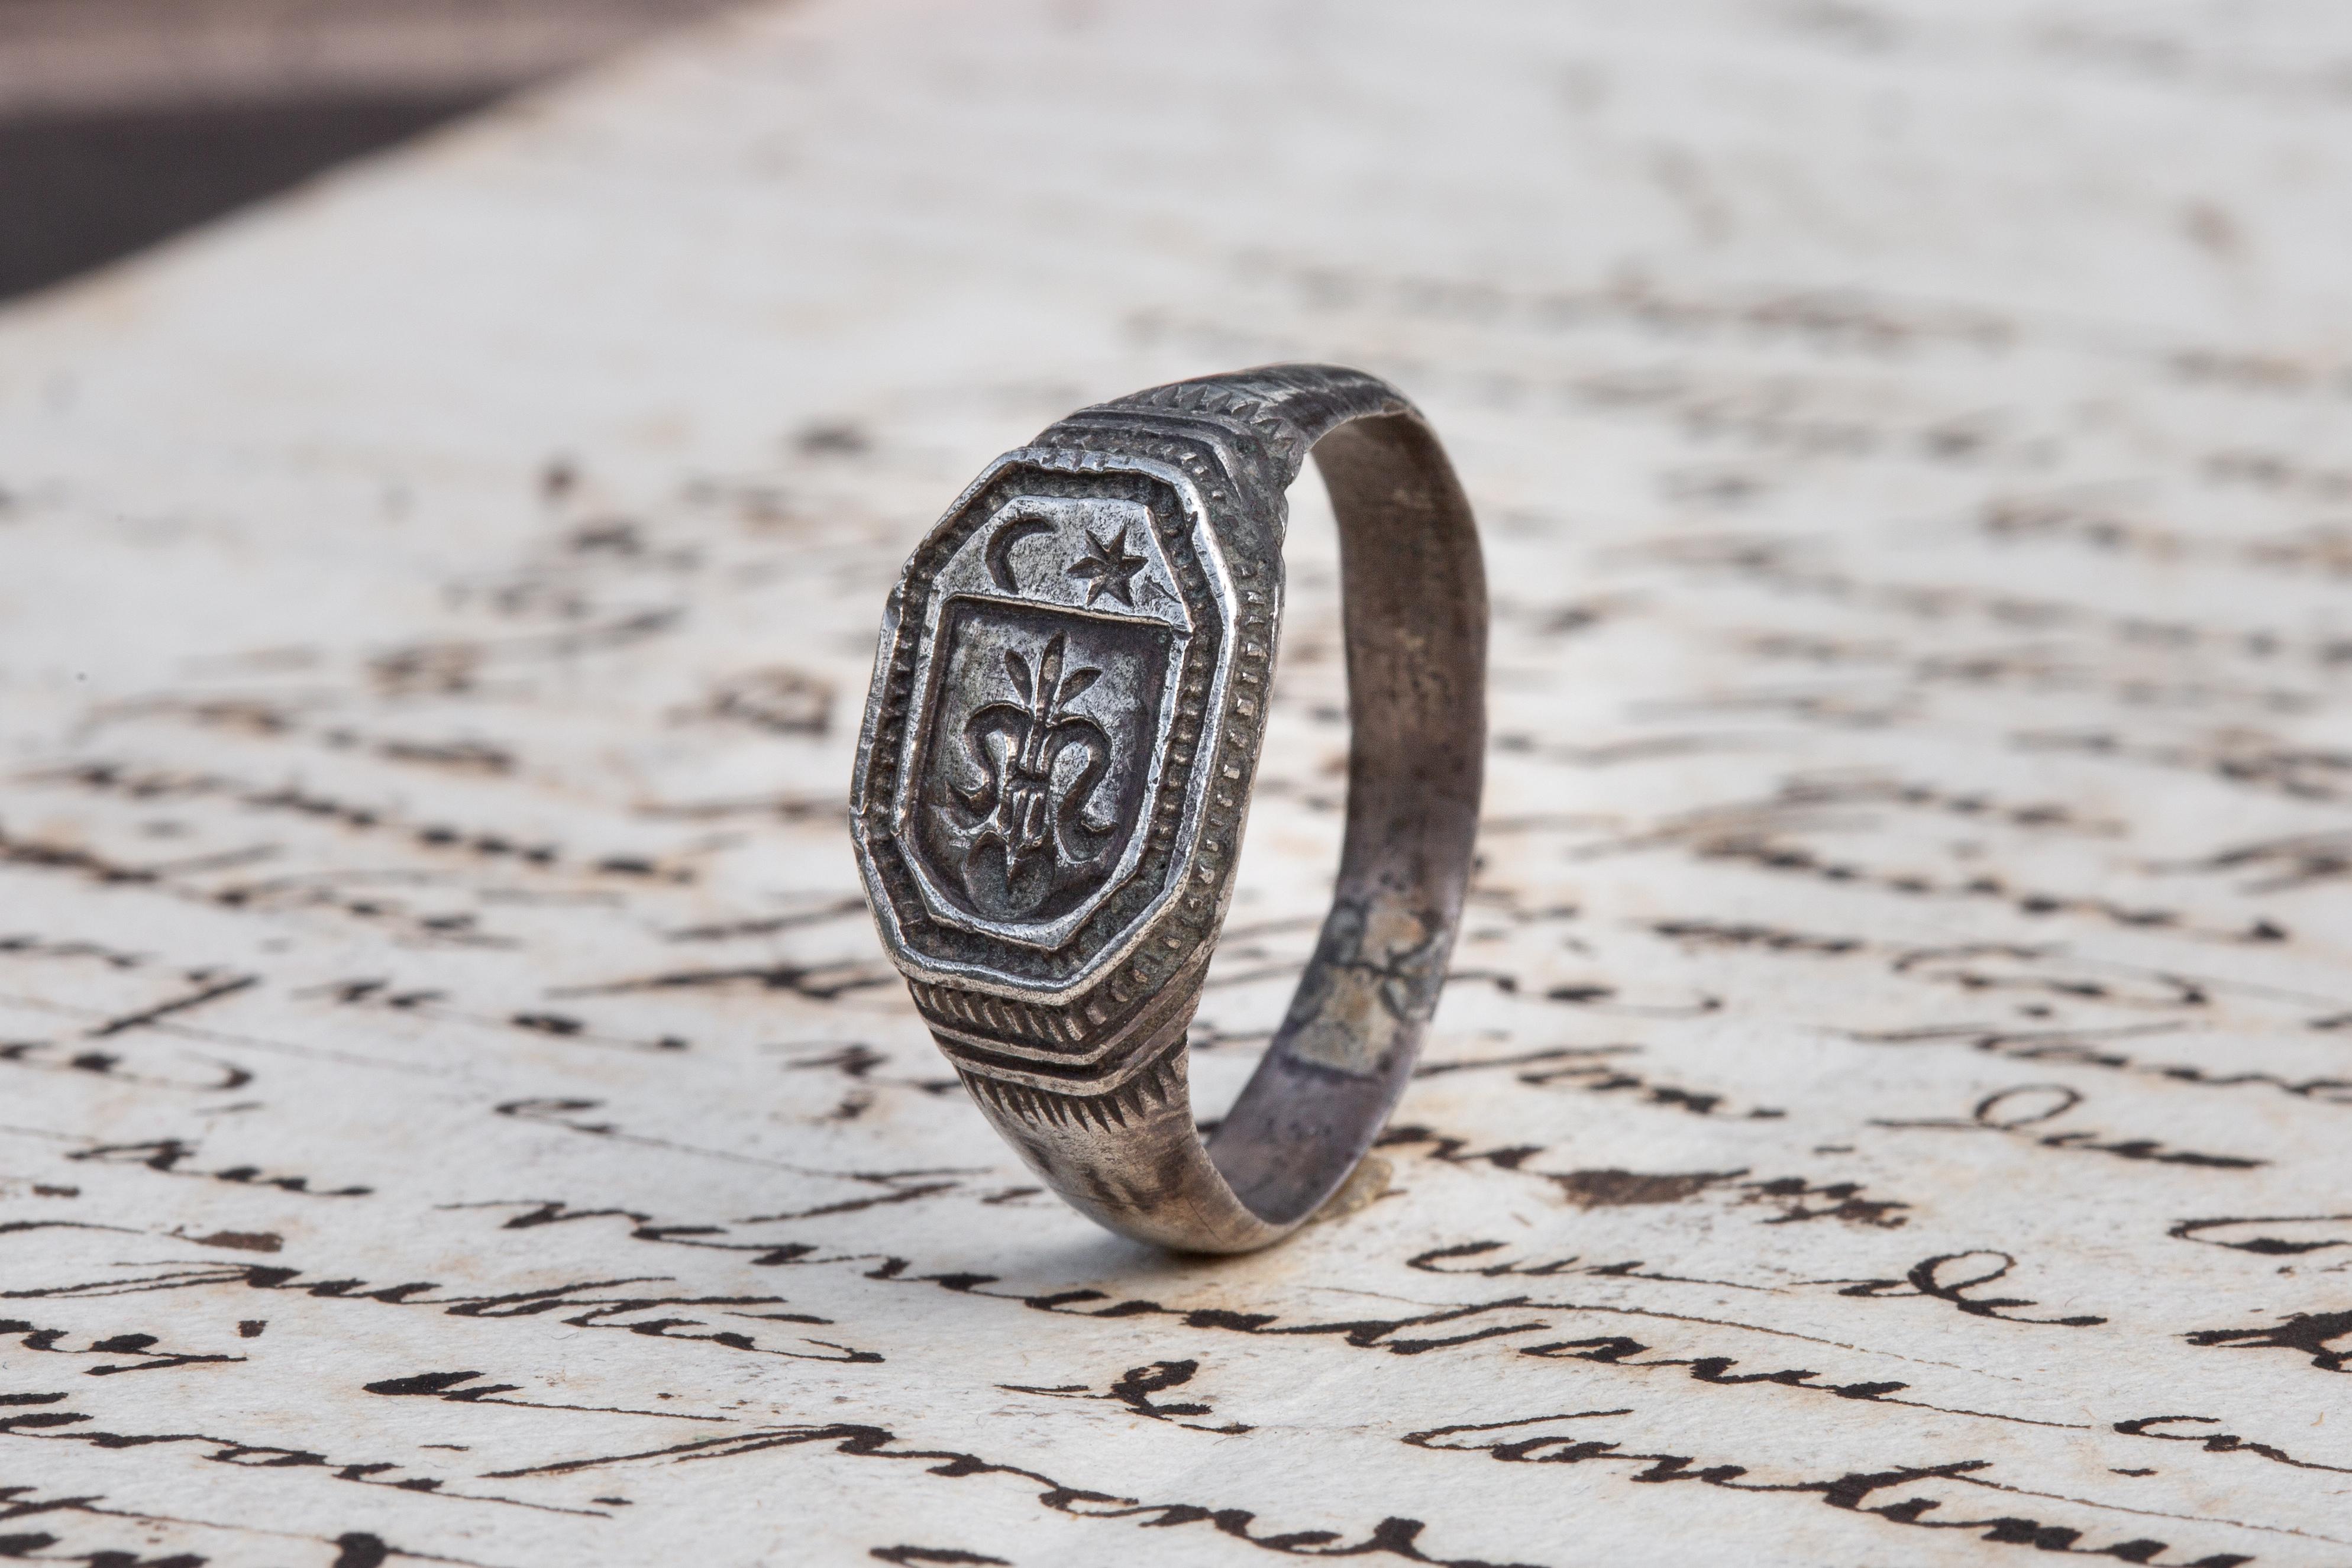 A scarce signet ring with a coat of arms intaglio crafted in silver dating to the late 14th - early 15th century. The flat, octagonal bezel is engraved with an early heraldic coat of arms consisting of a stylised fleur-de-lys with a crescent and sun